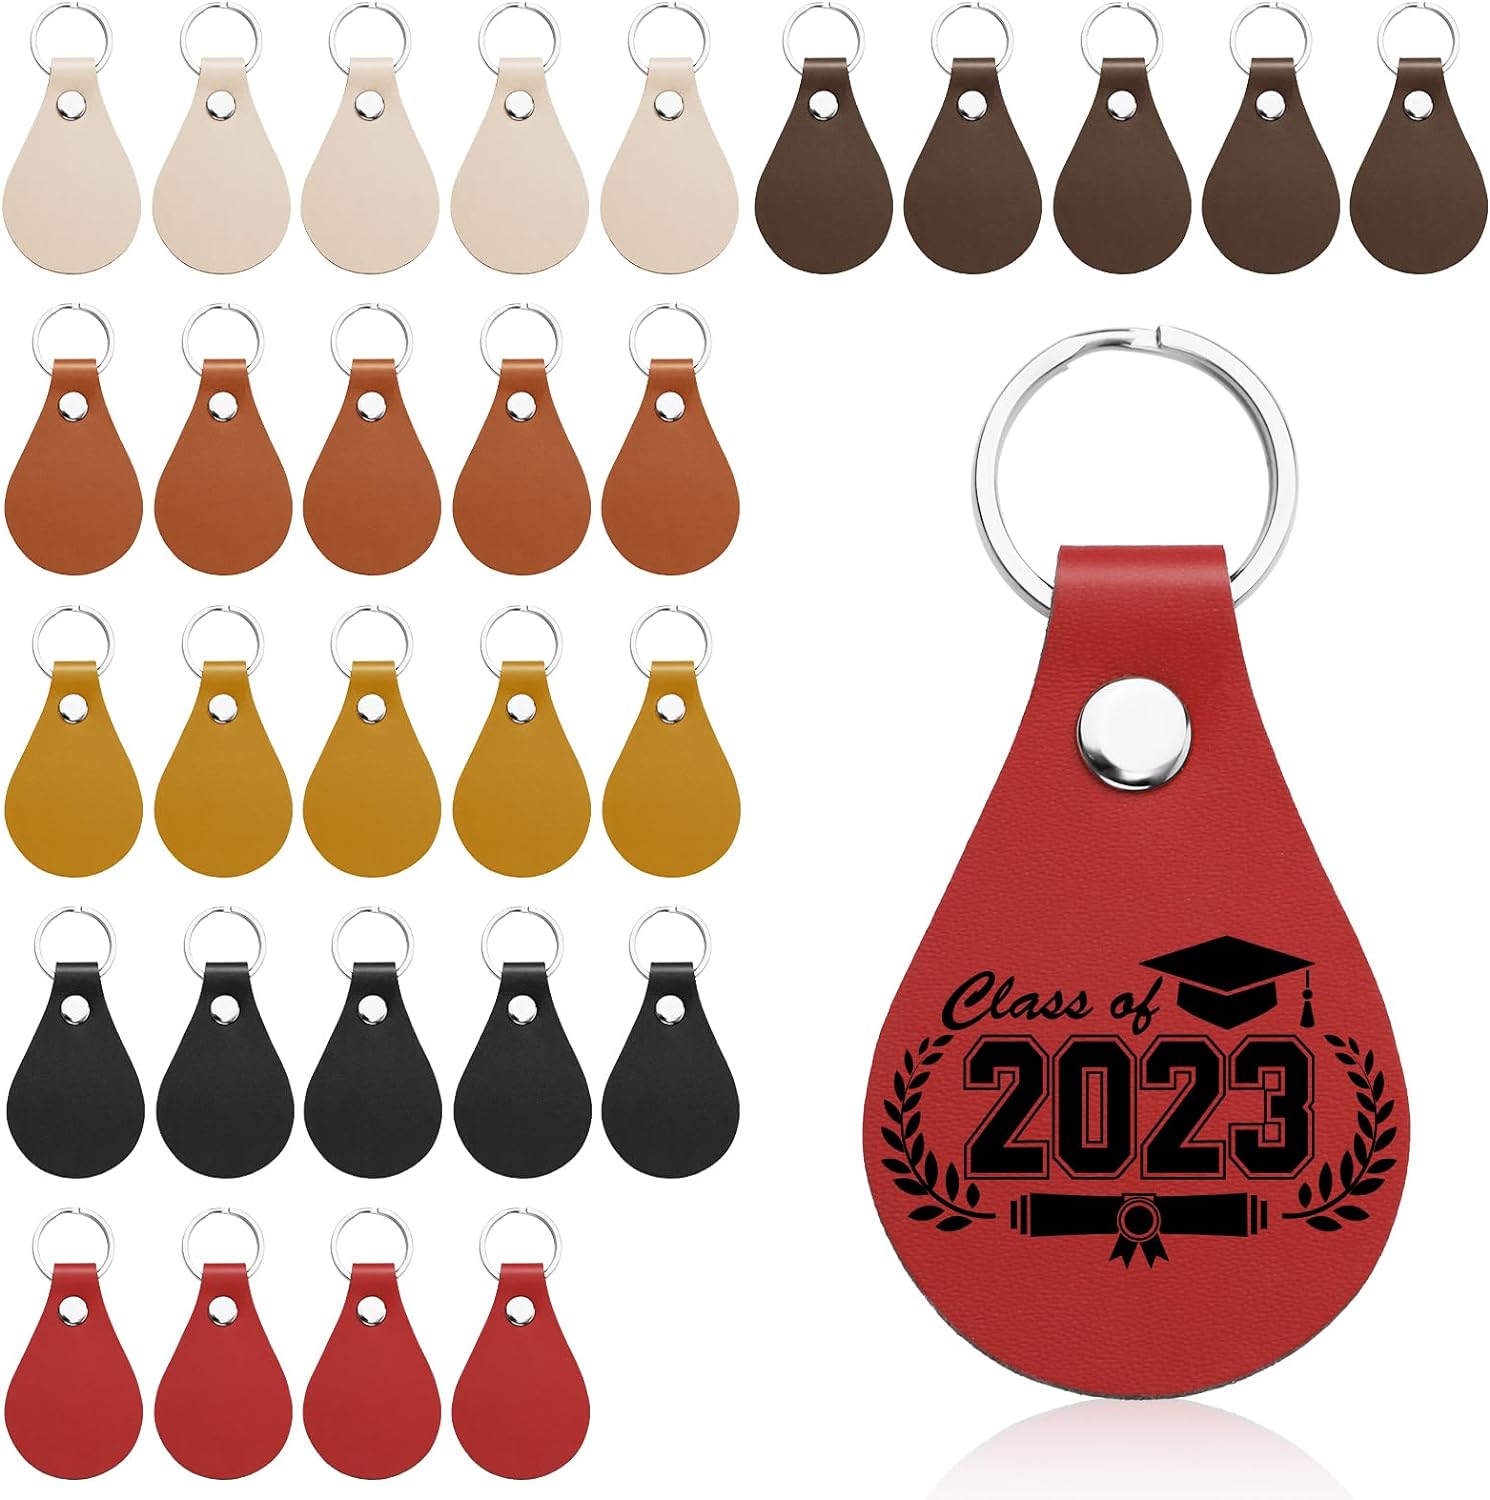  Blank Leather Keychains For Engraving